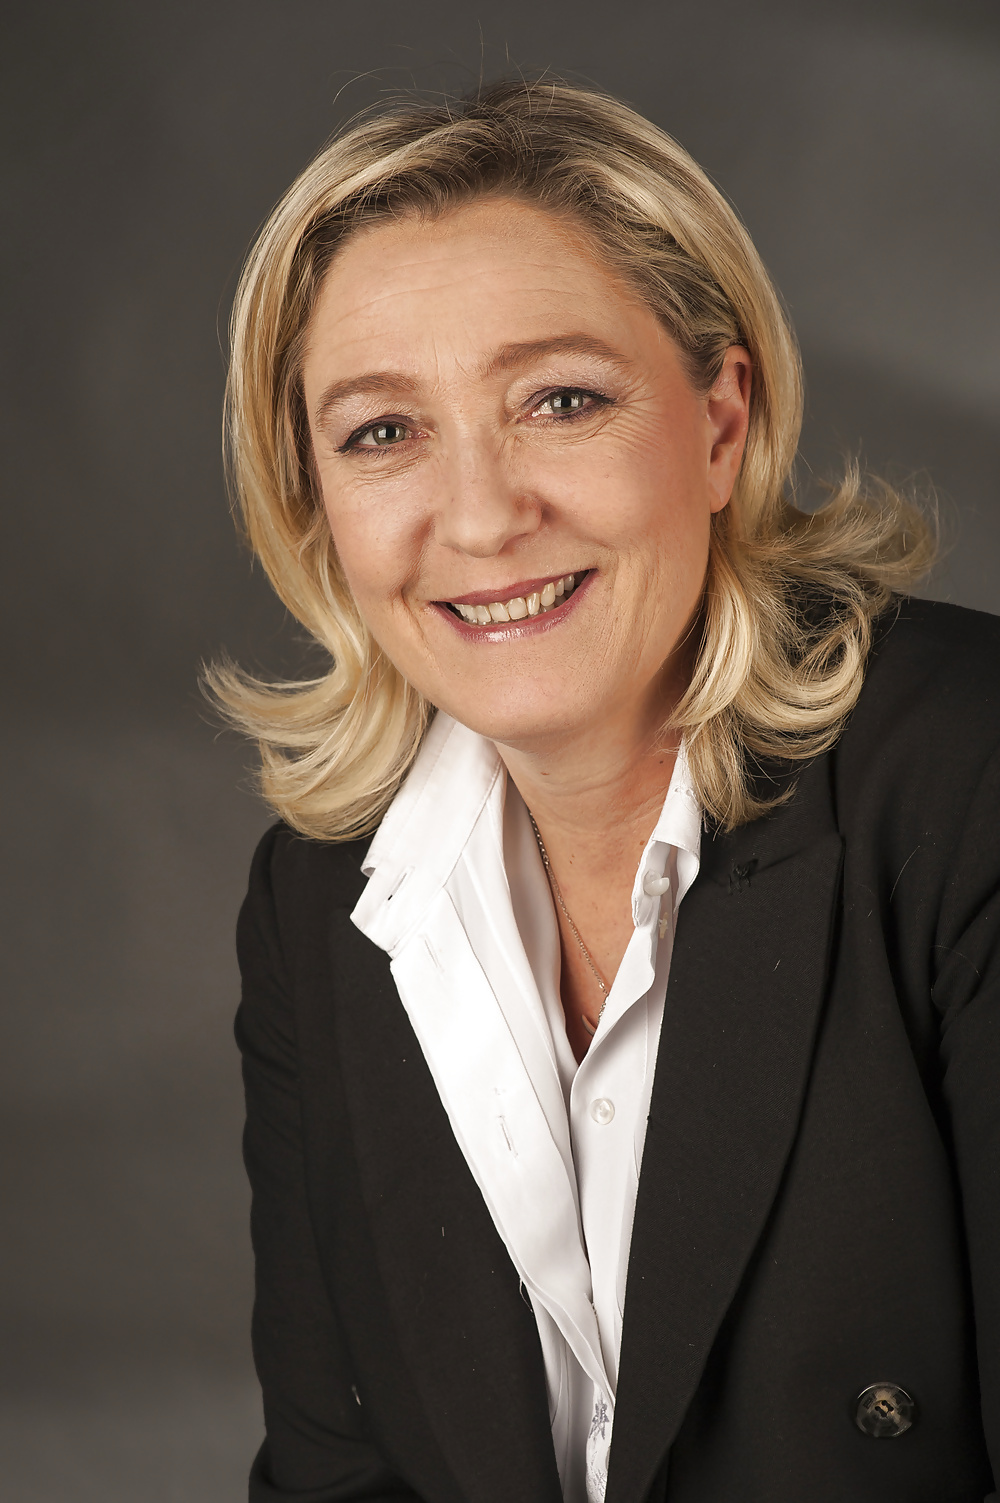 I adore jerking to sexy Marine Le Pen #35343842